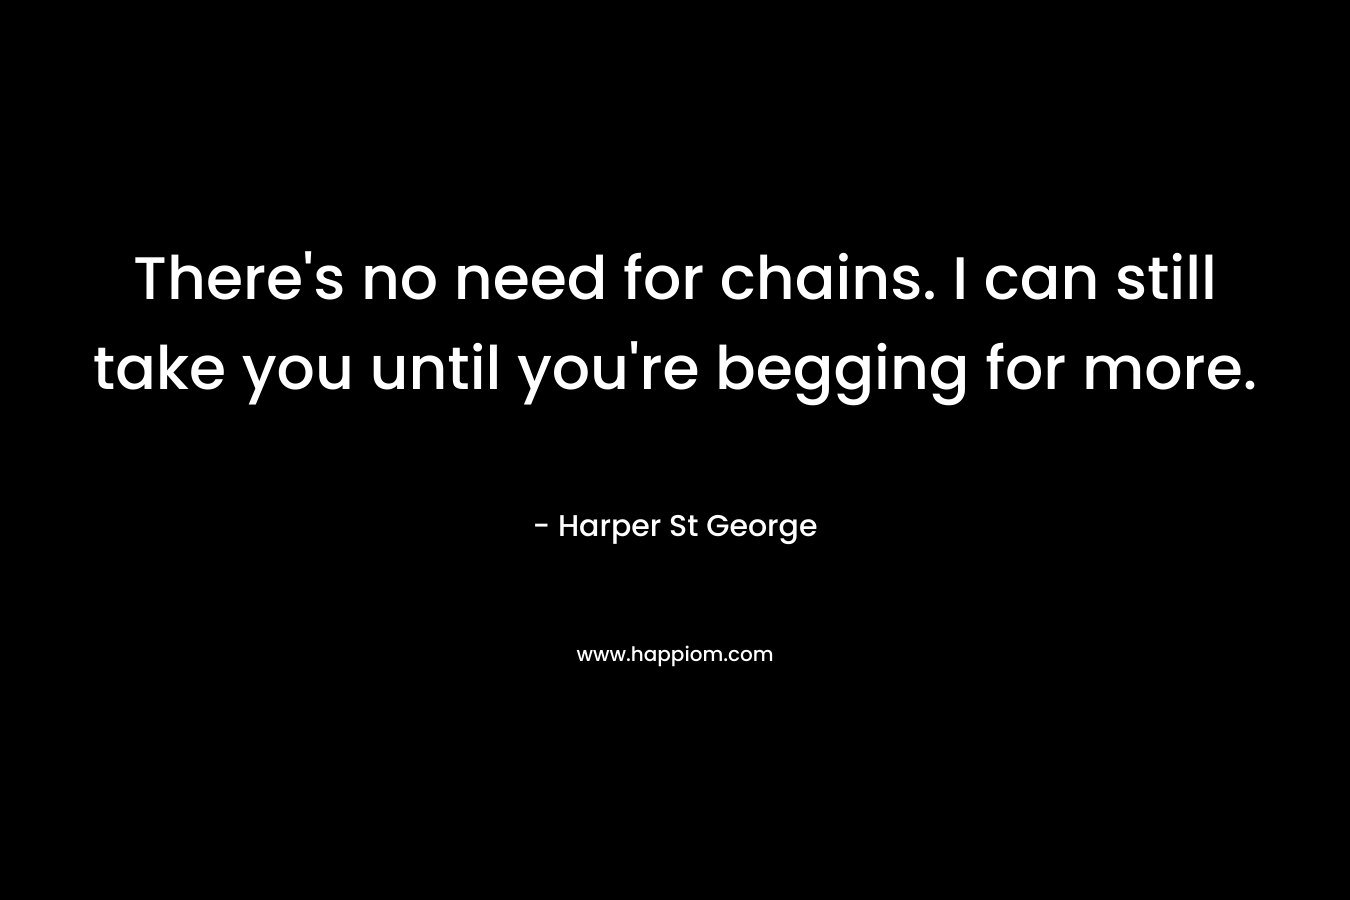 There's no need for chains. I can still take you until you're begging for more.